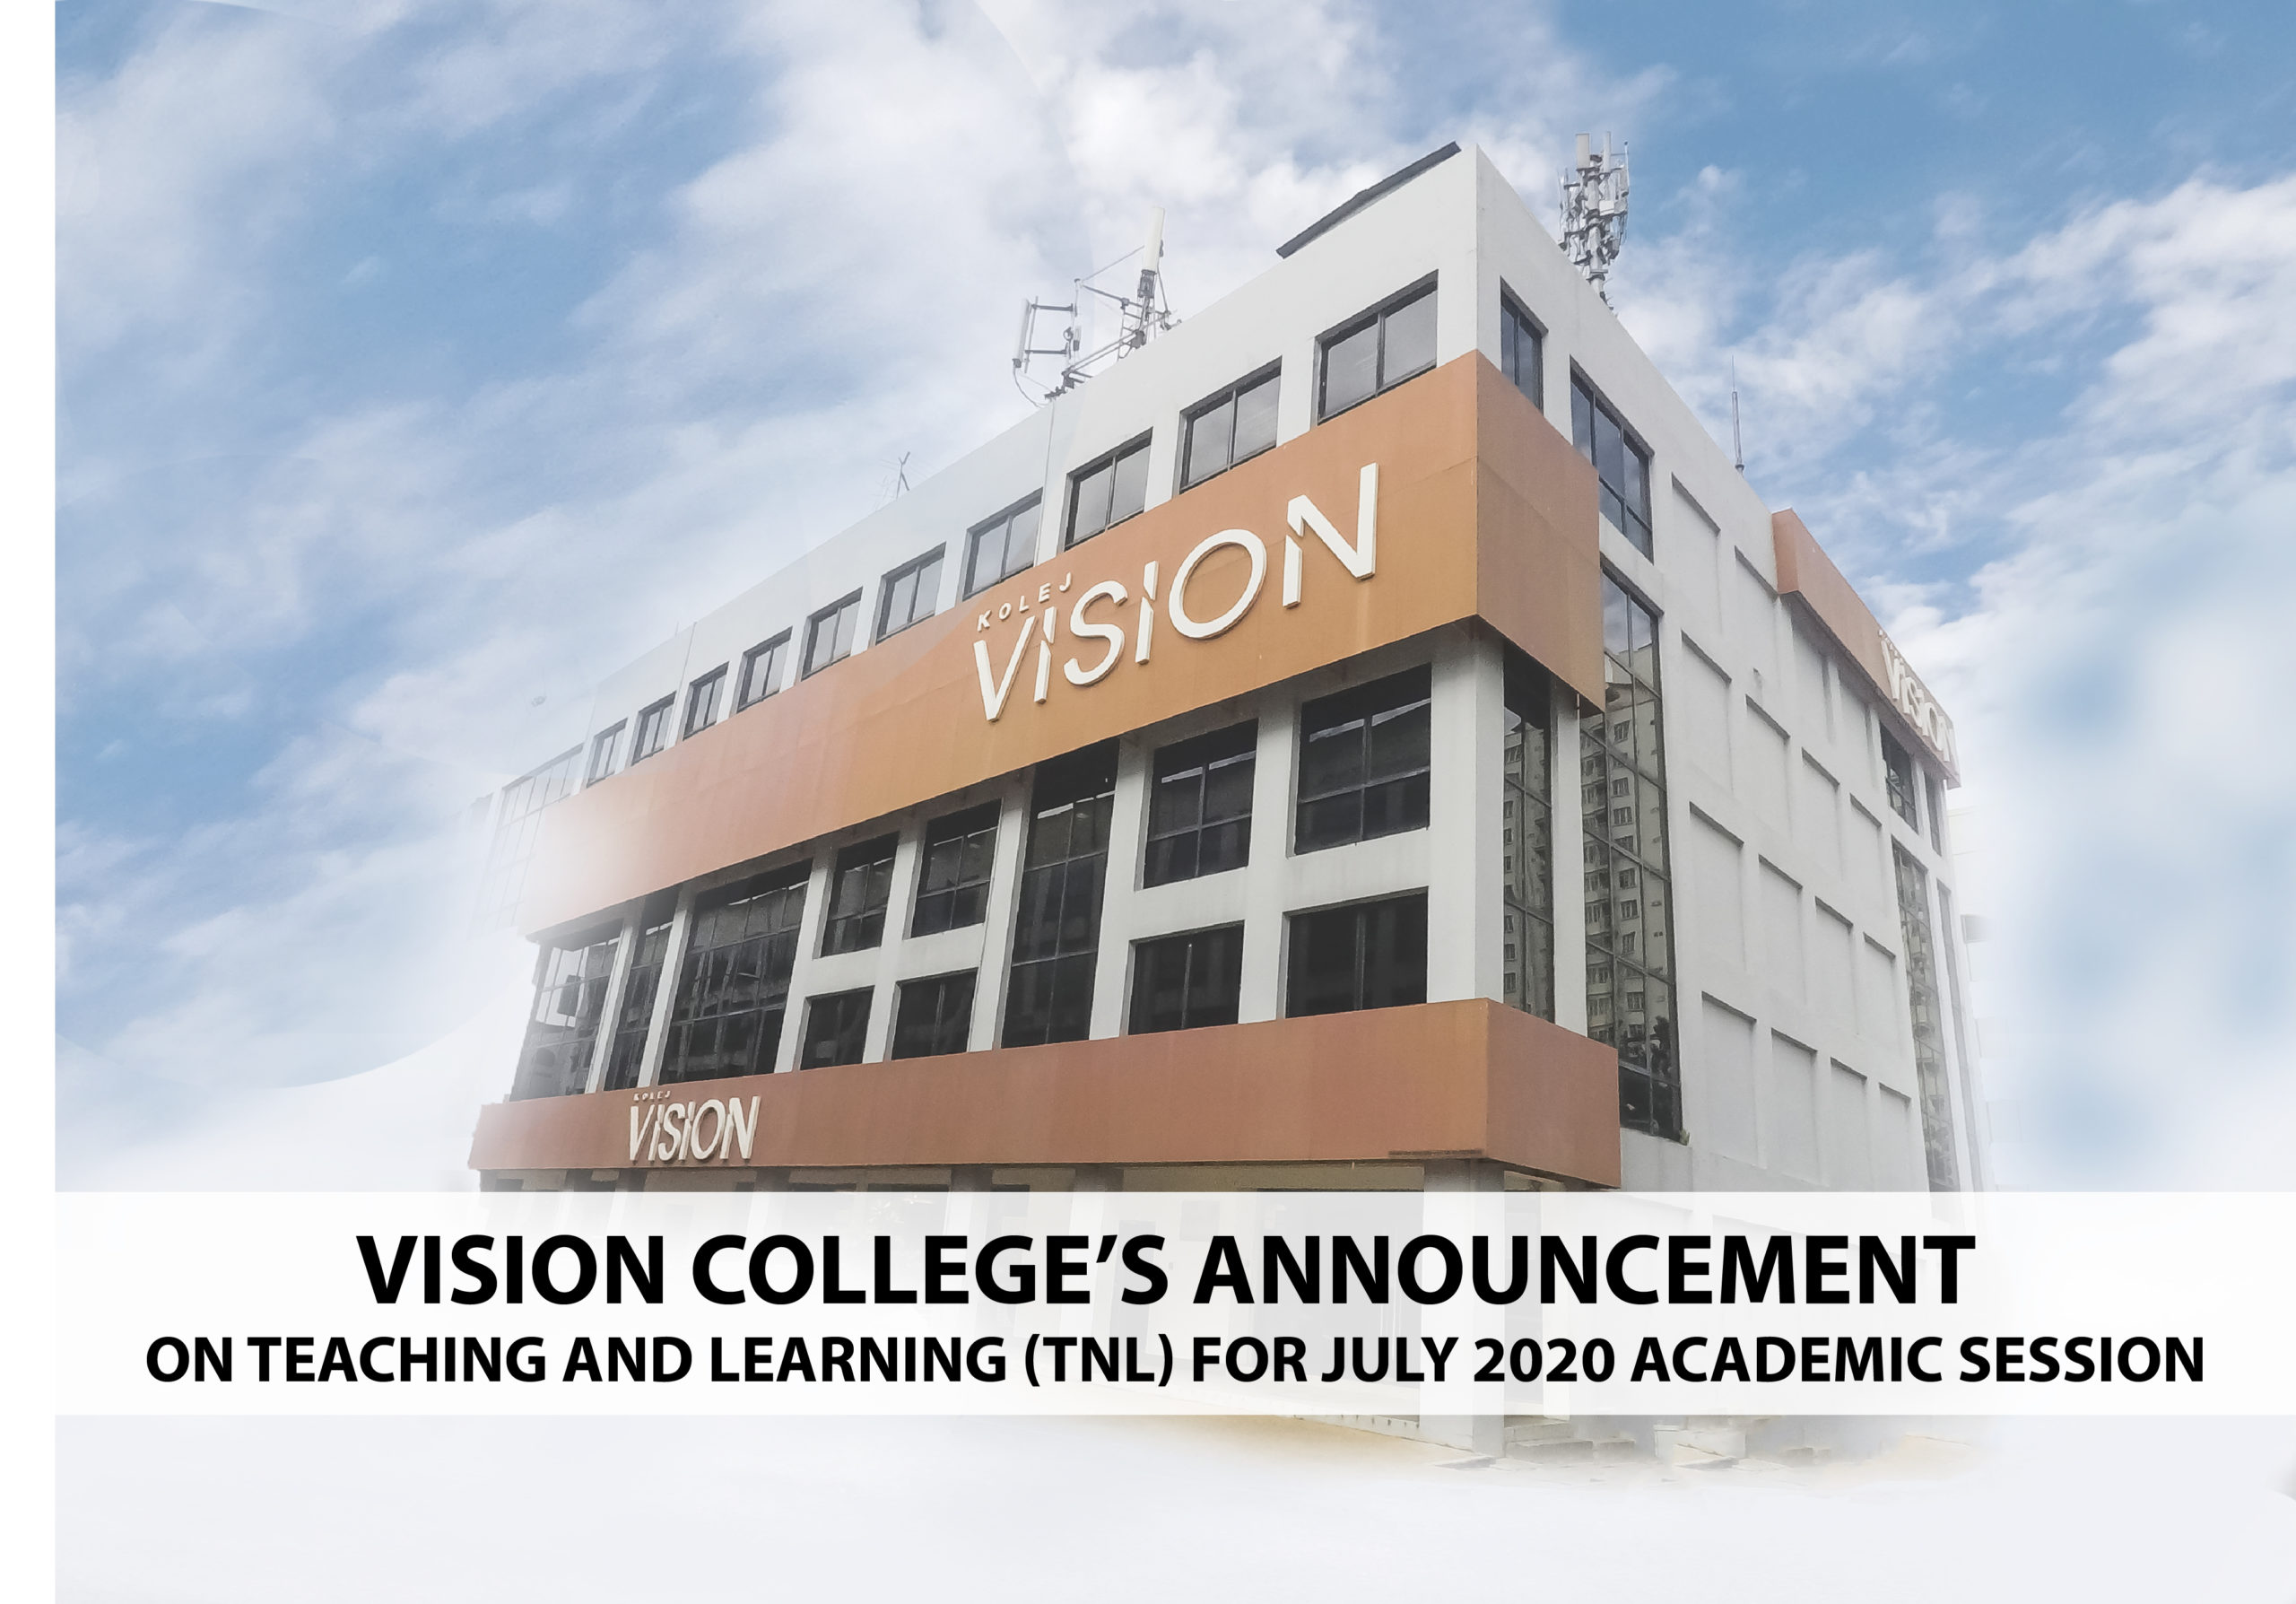 Vision College’s Announcement on Teaching and Learning (TnL) for July 2020 Academic Session